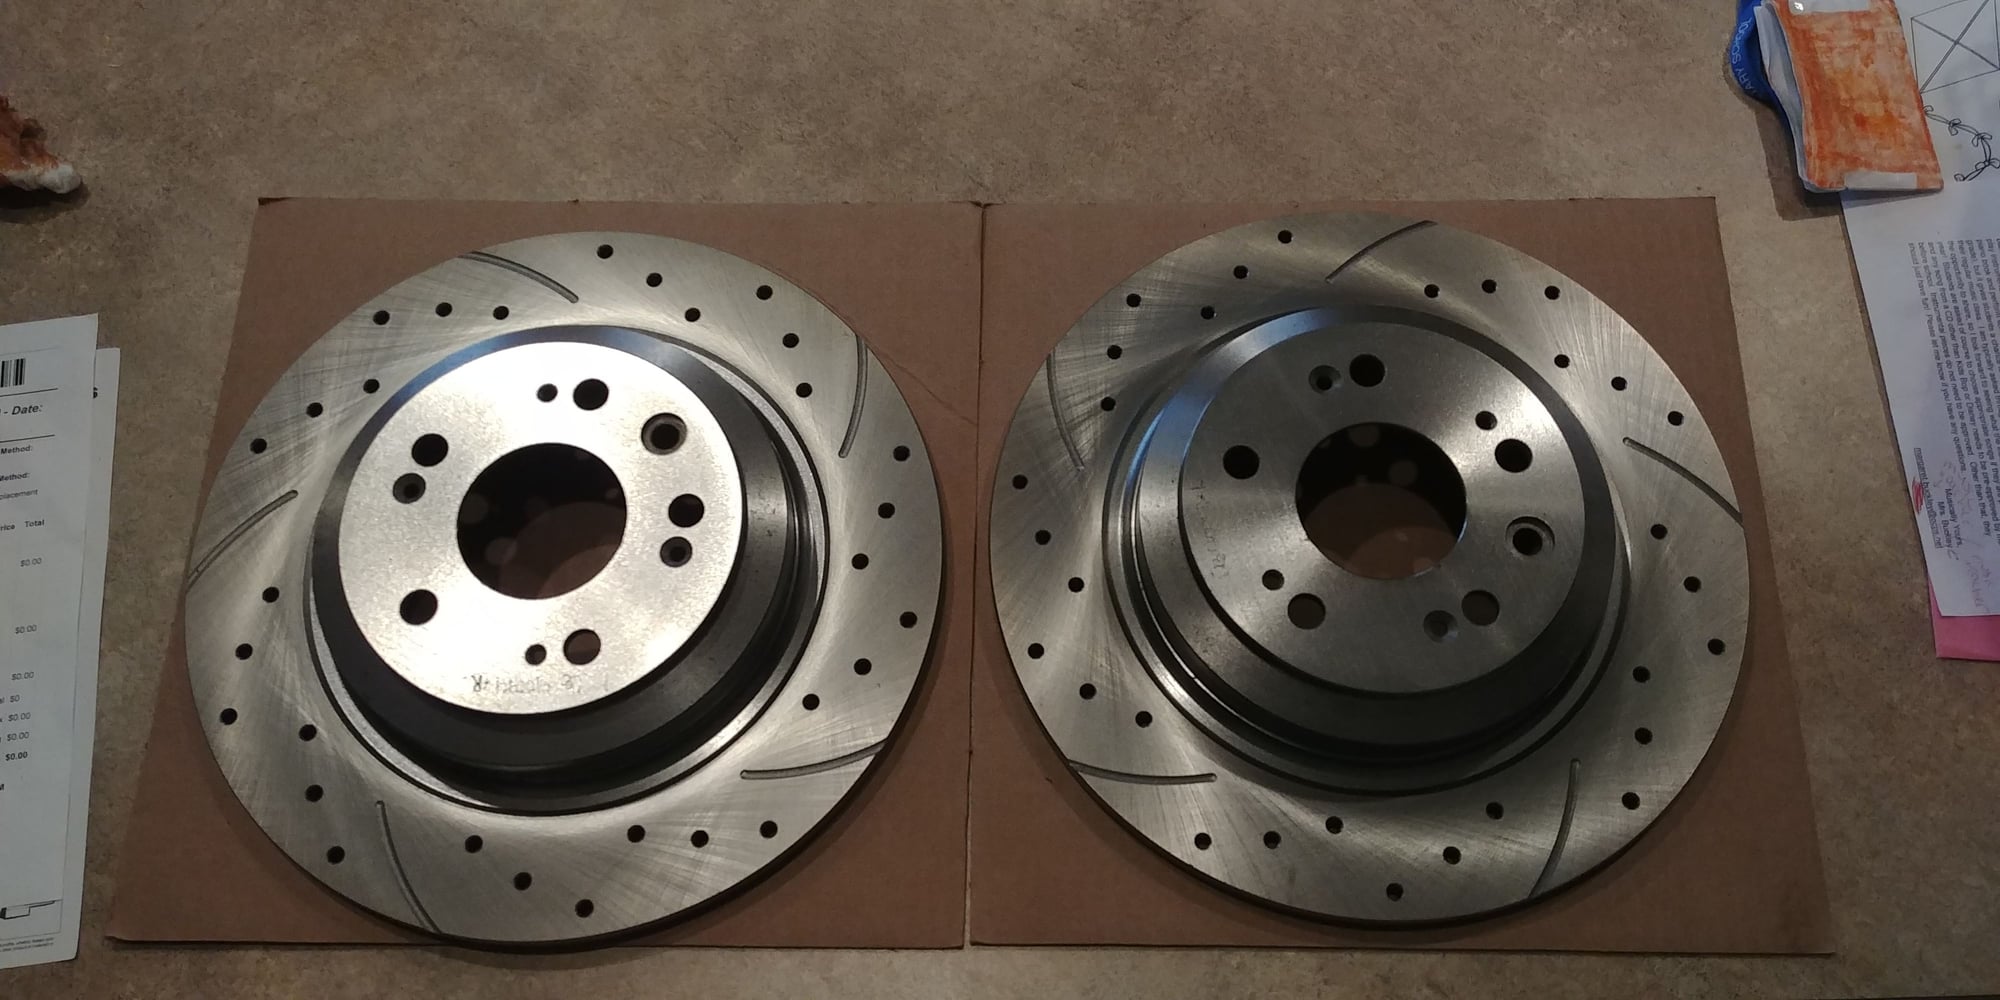 Brakes - FS: Drilled / Slotted Rotors (Brand New) - 4G TL - New - 2009 to 2014 Acura TL - Orlando, FL 32824, United States